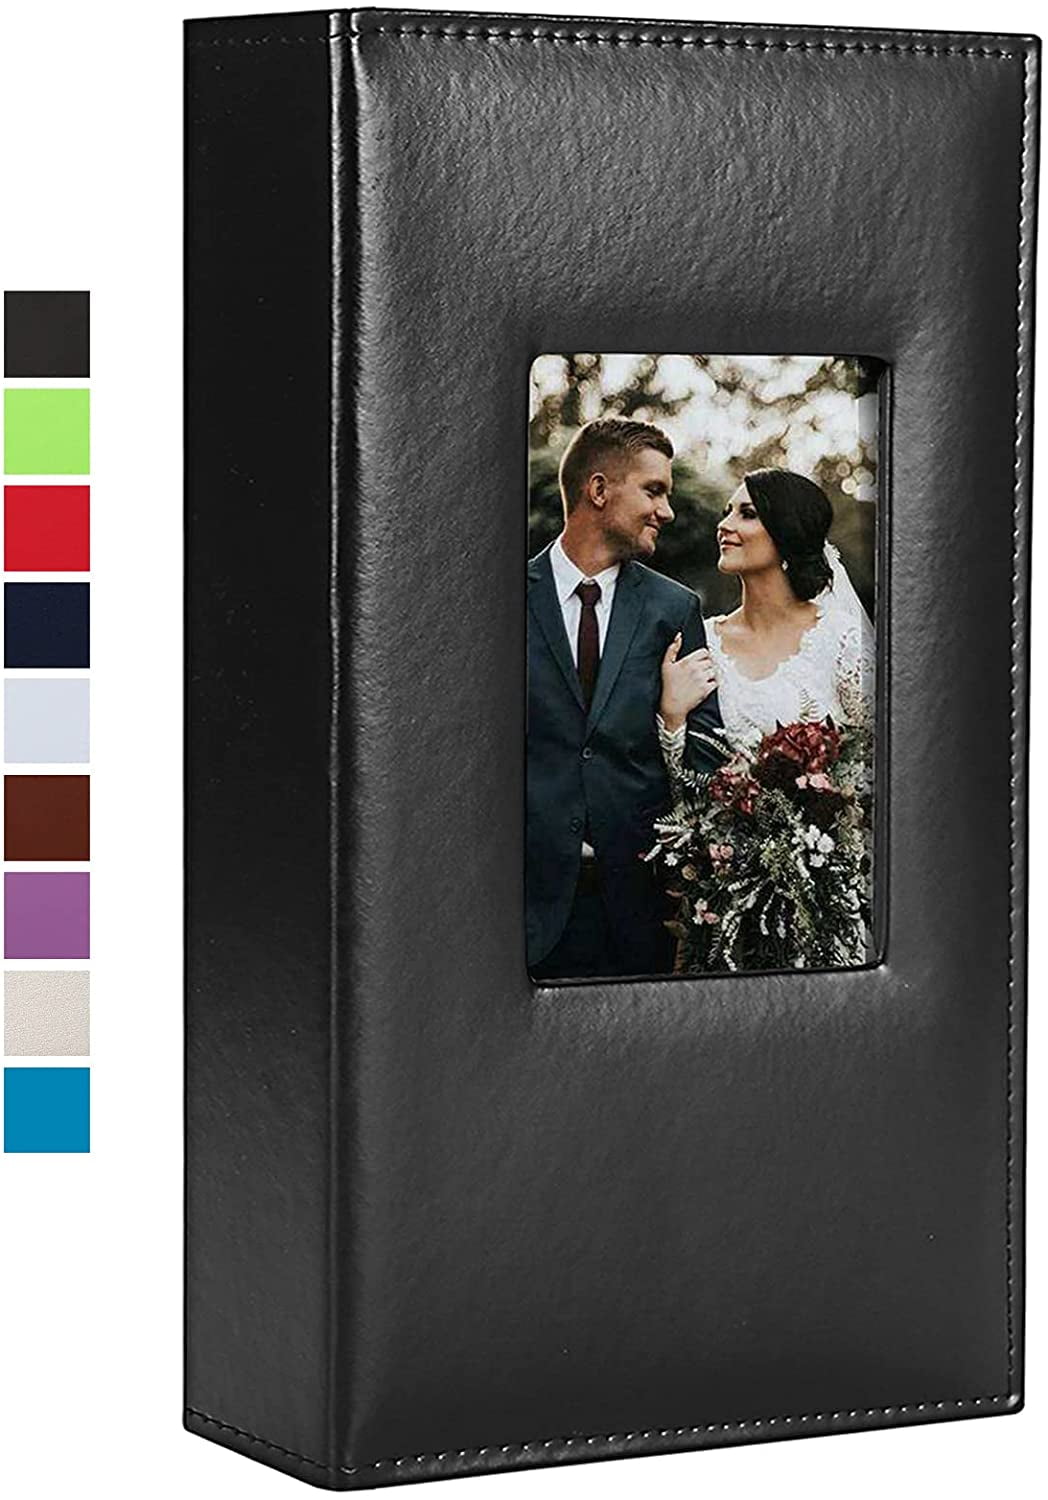 Vienrose Photo Album 4x6 300 Photos with Memo Area Leather Cover Large Capacity Pictures Book for Wedding Family Baby Vacation